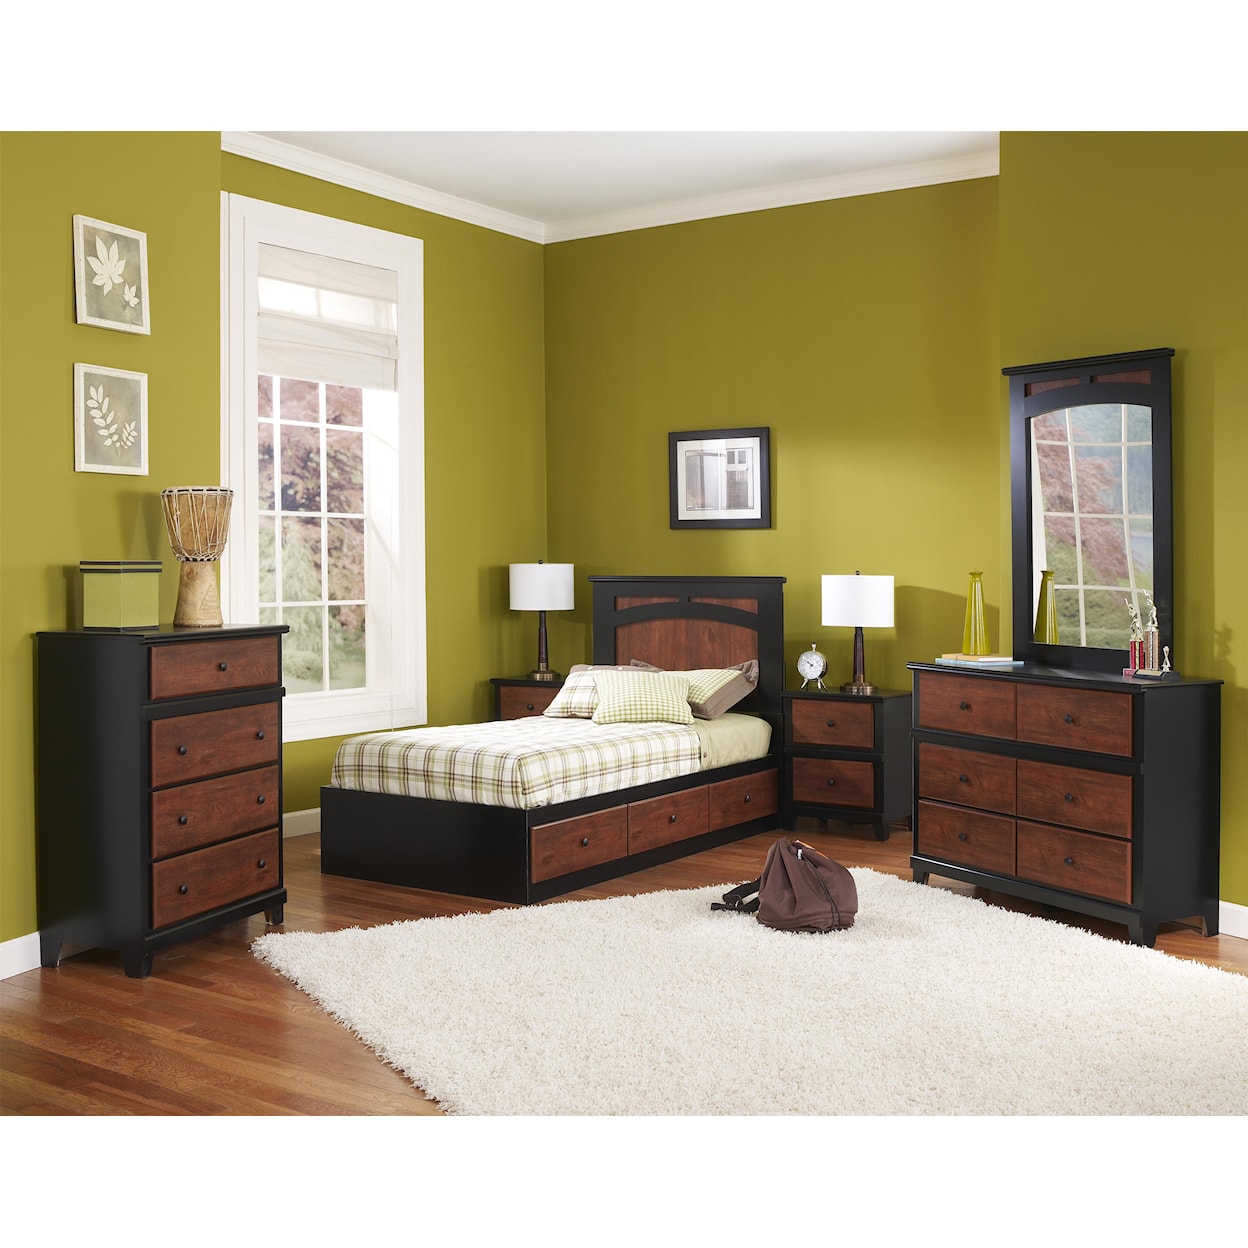 Perdue 49000 Series Twin Mates Bed with Panel Headboard